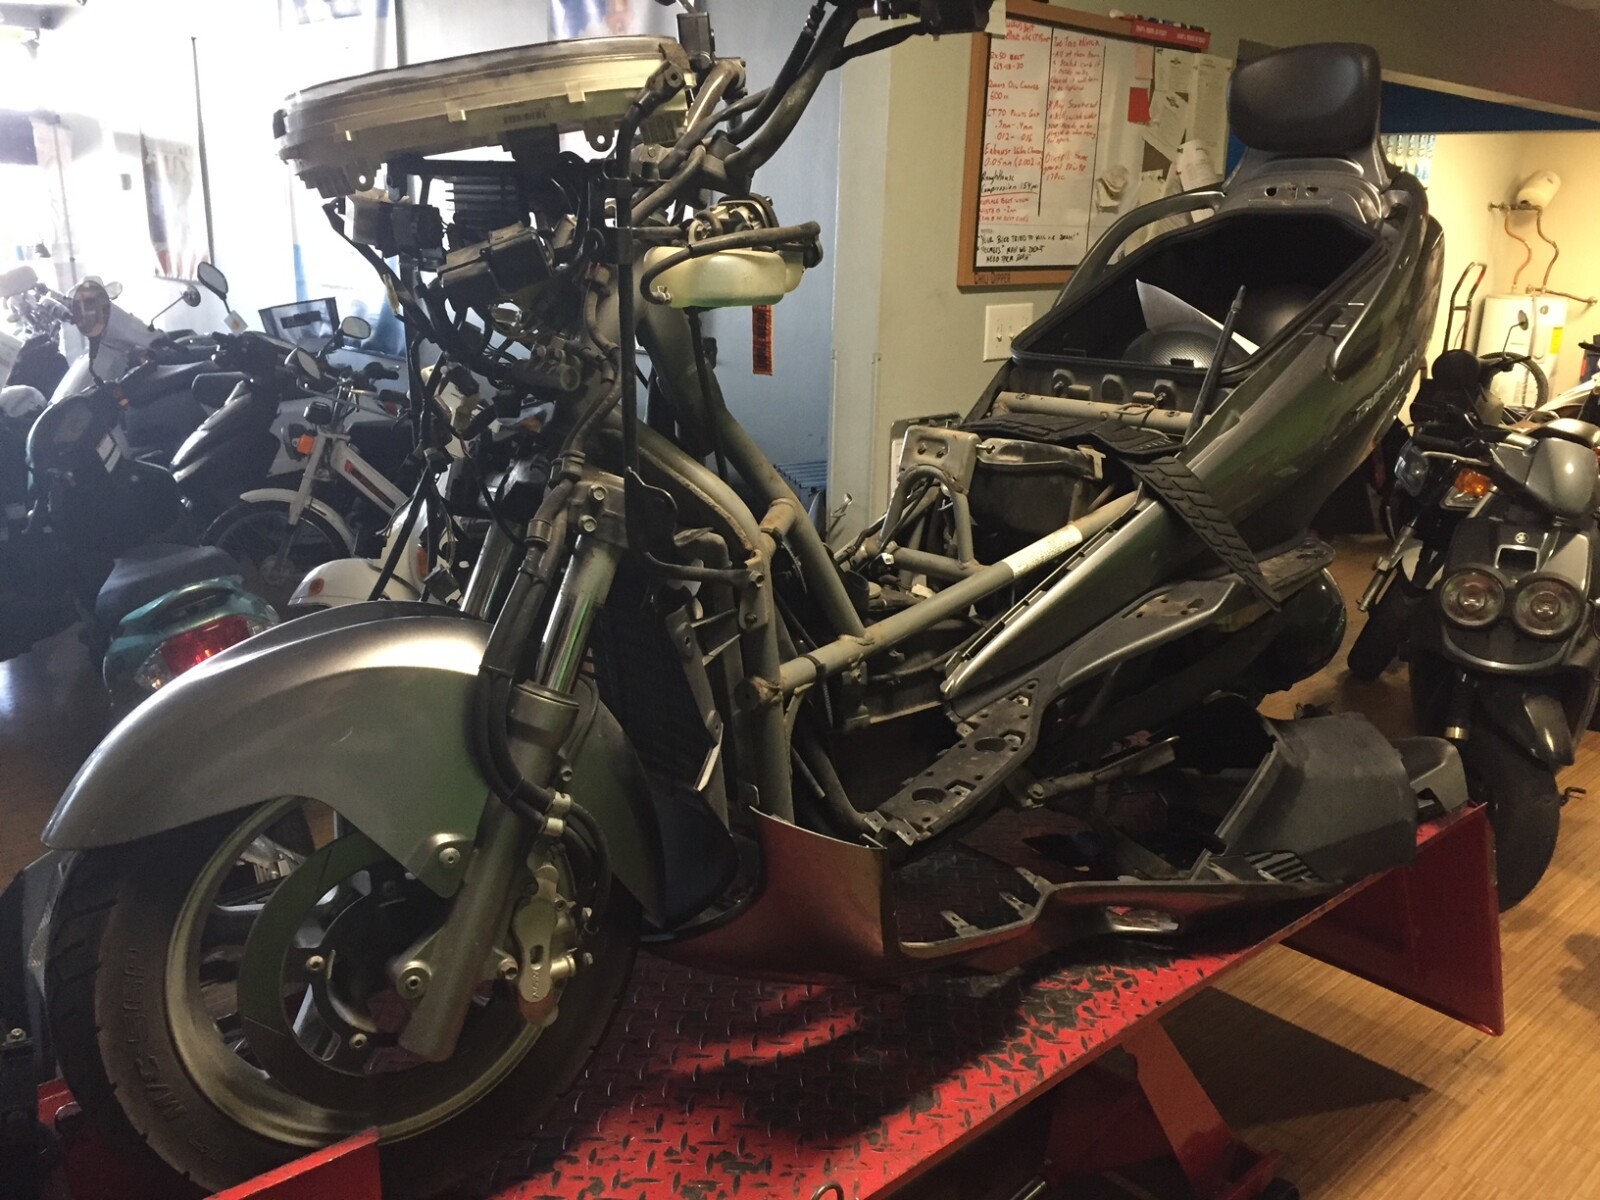 Craigslist motorcycles worcester boston motorcycles/scooters